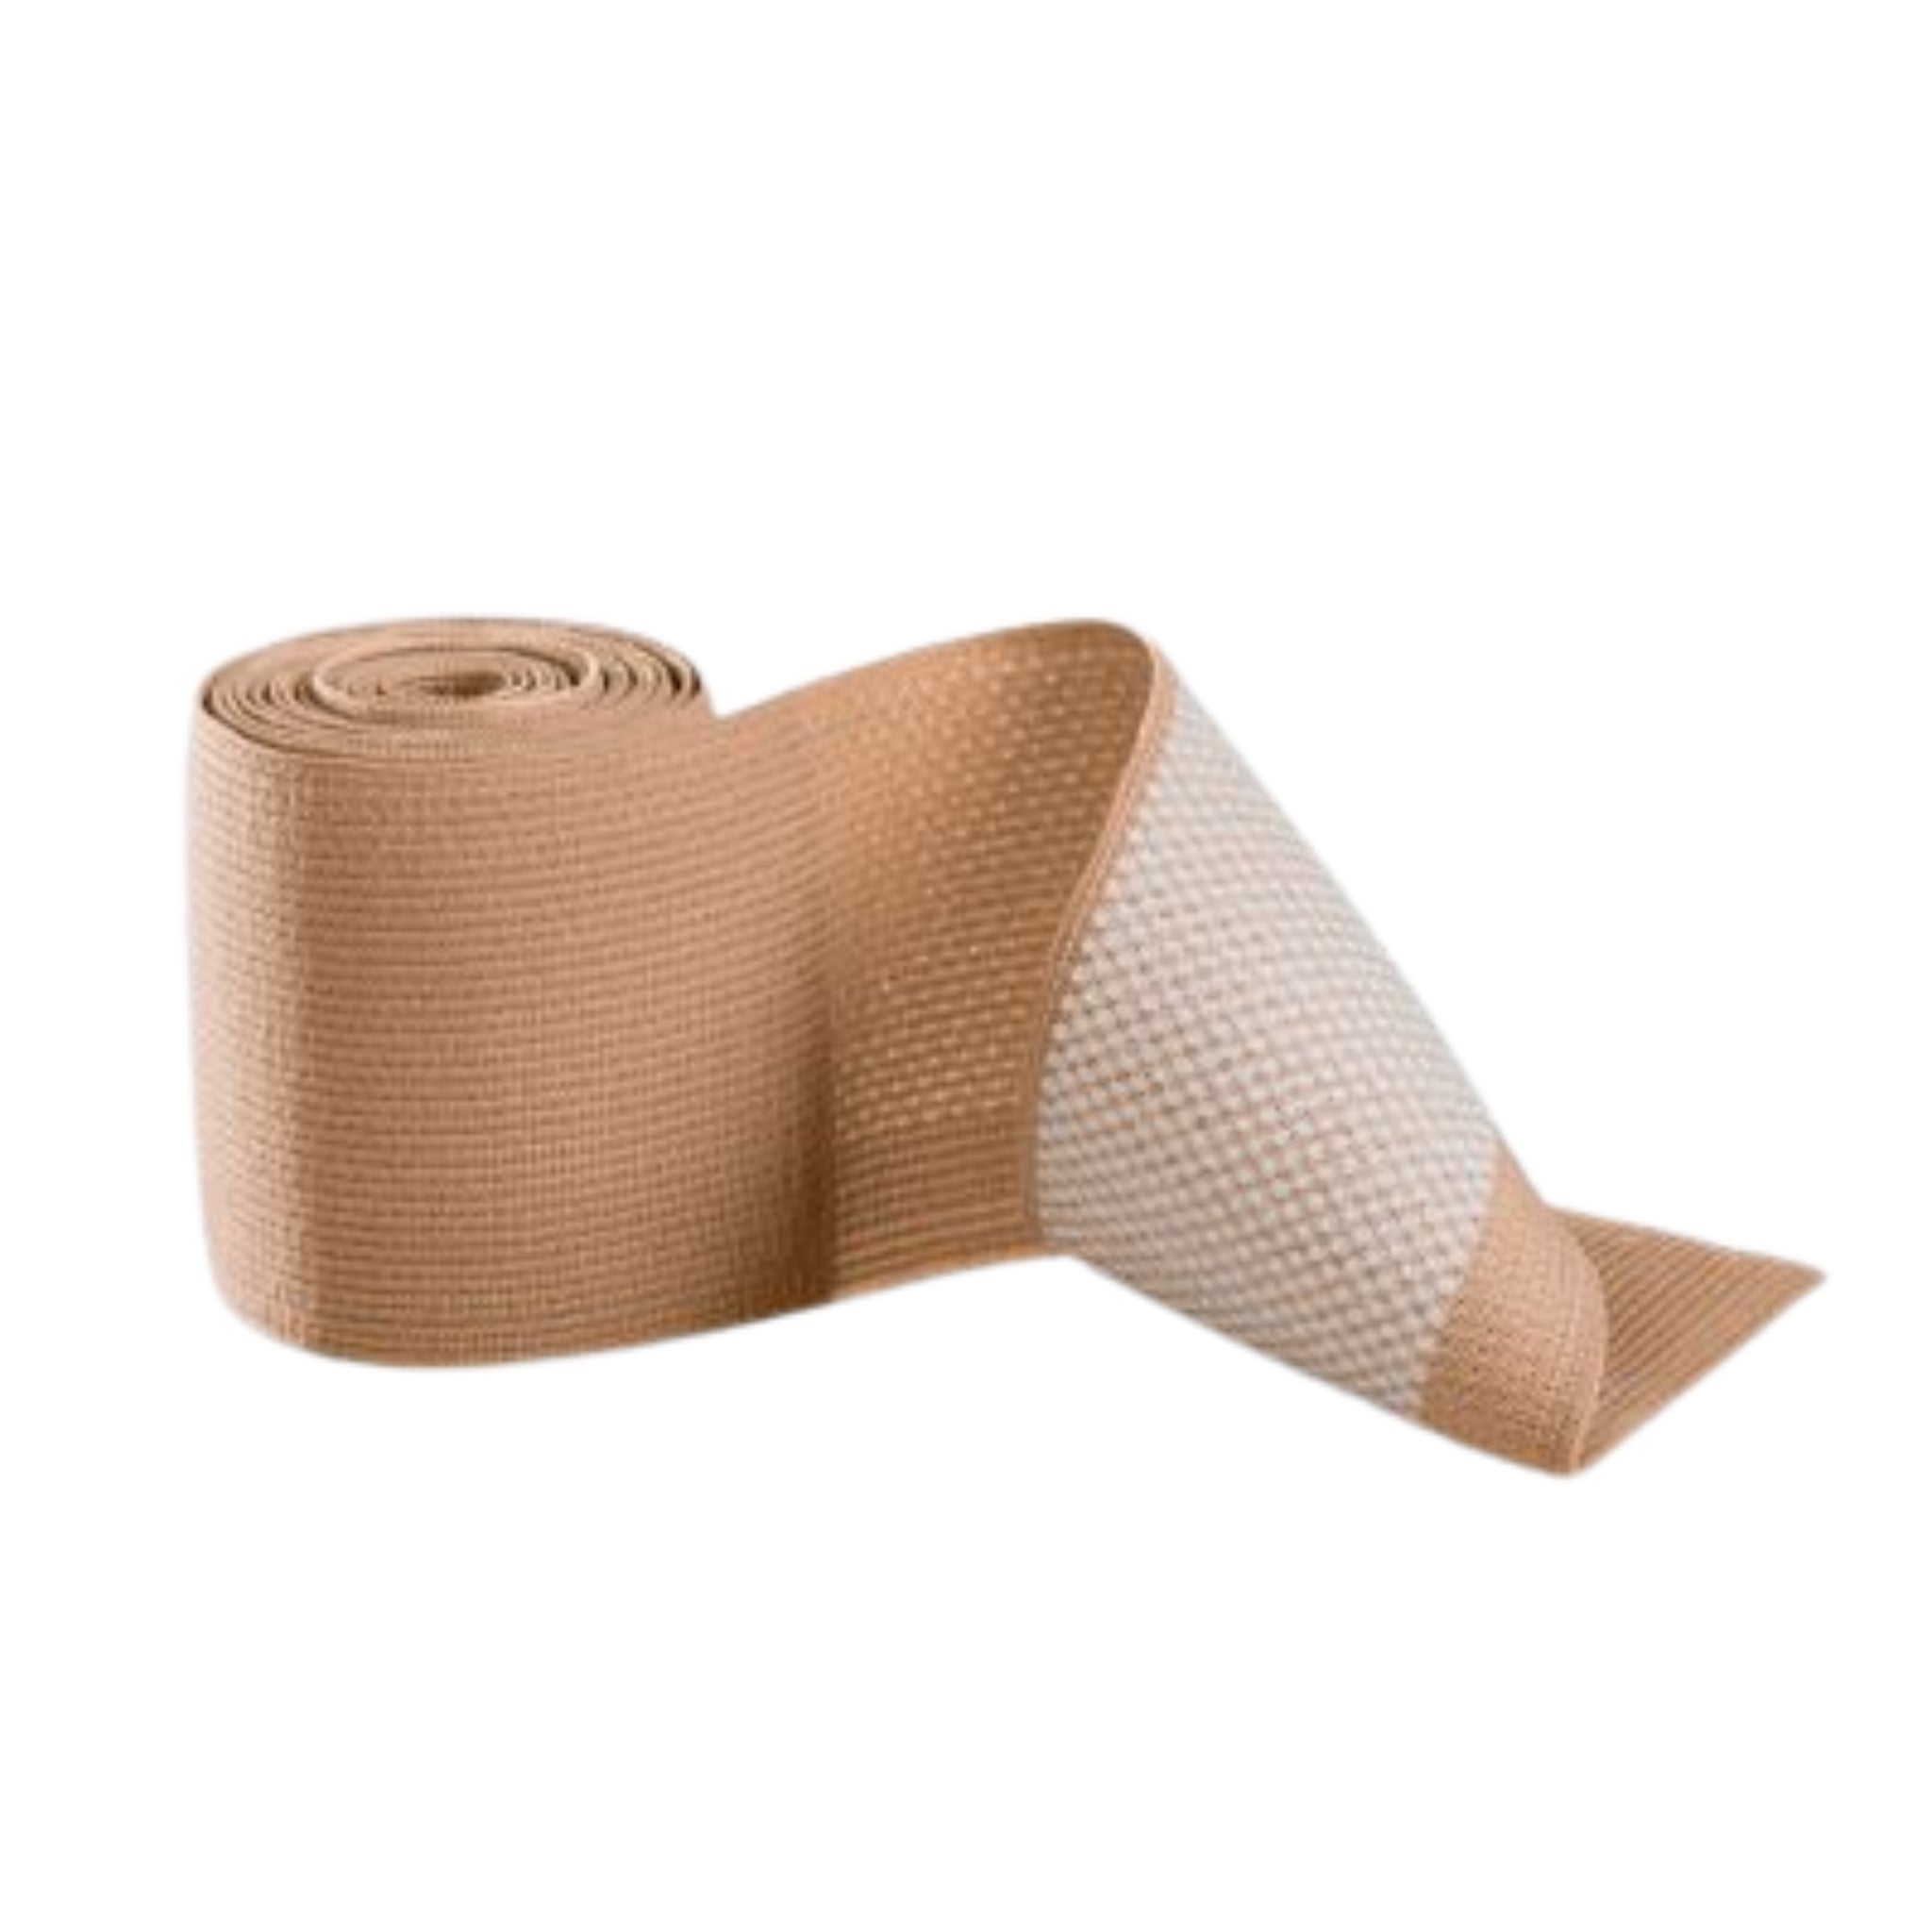 Compression Stockings | Thigh High | Sensitive Topband | Closed Toe | Caramel | mediven cotton